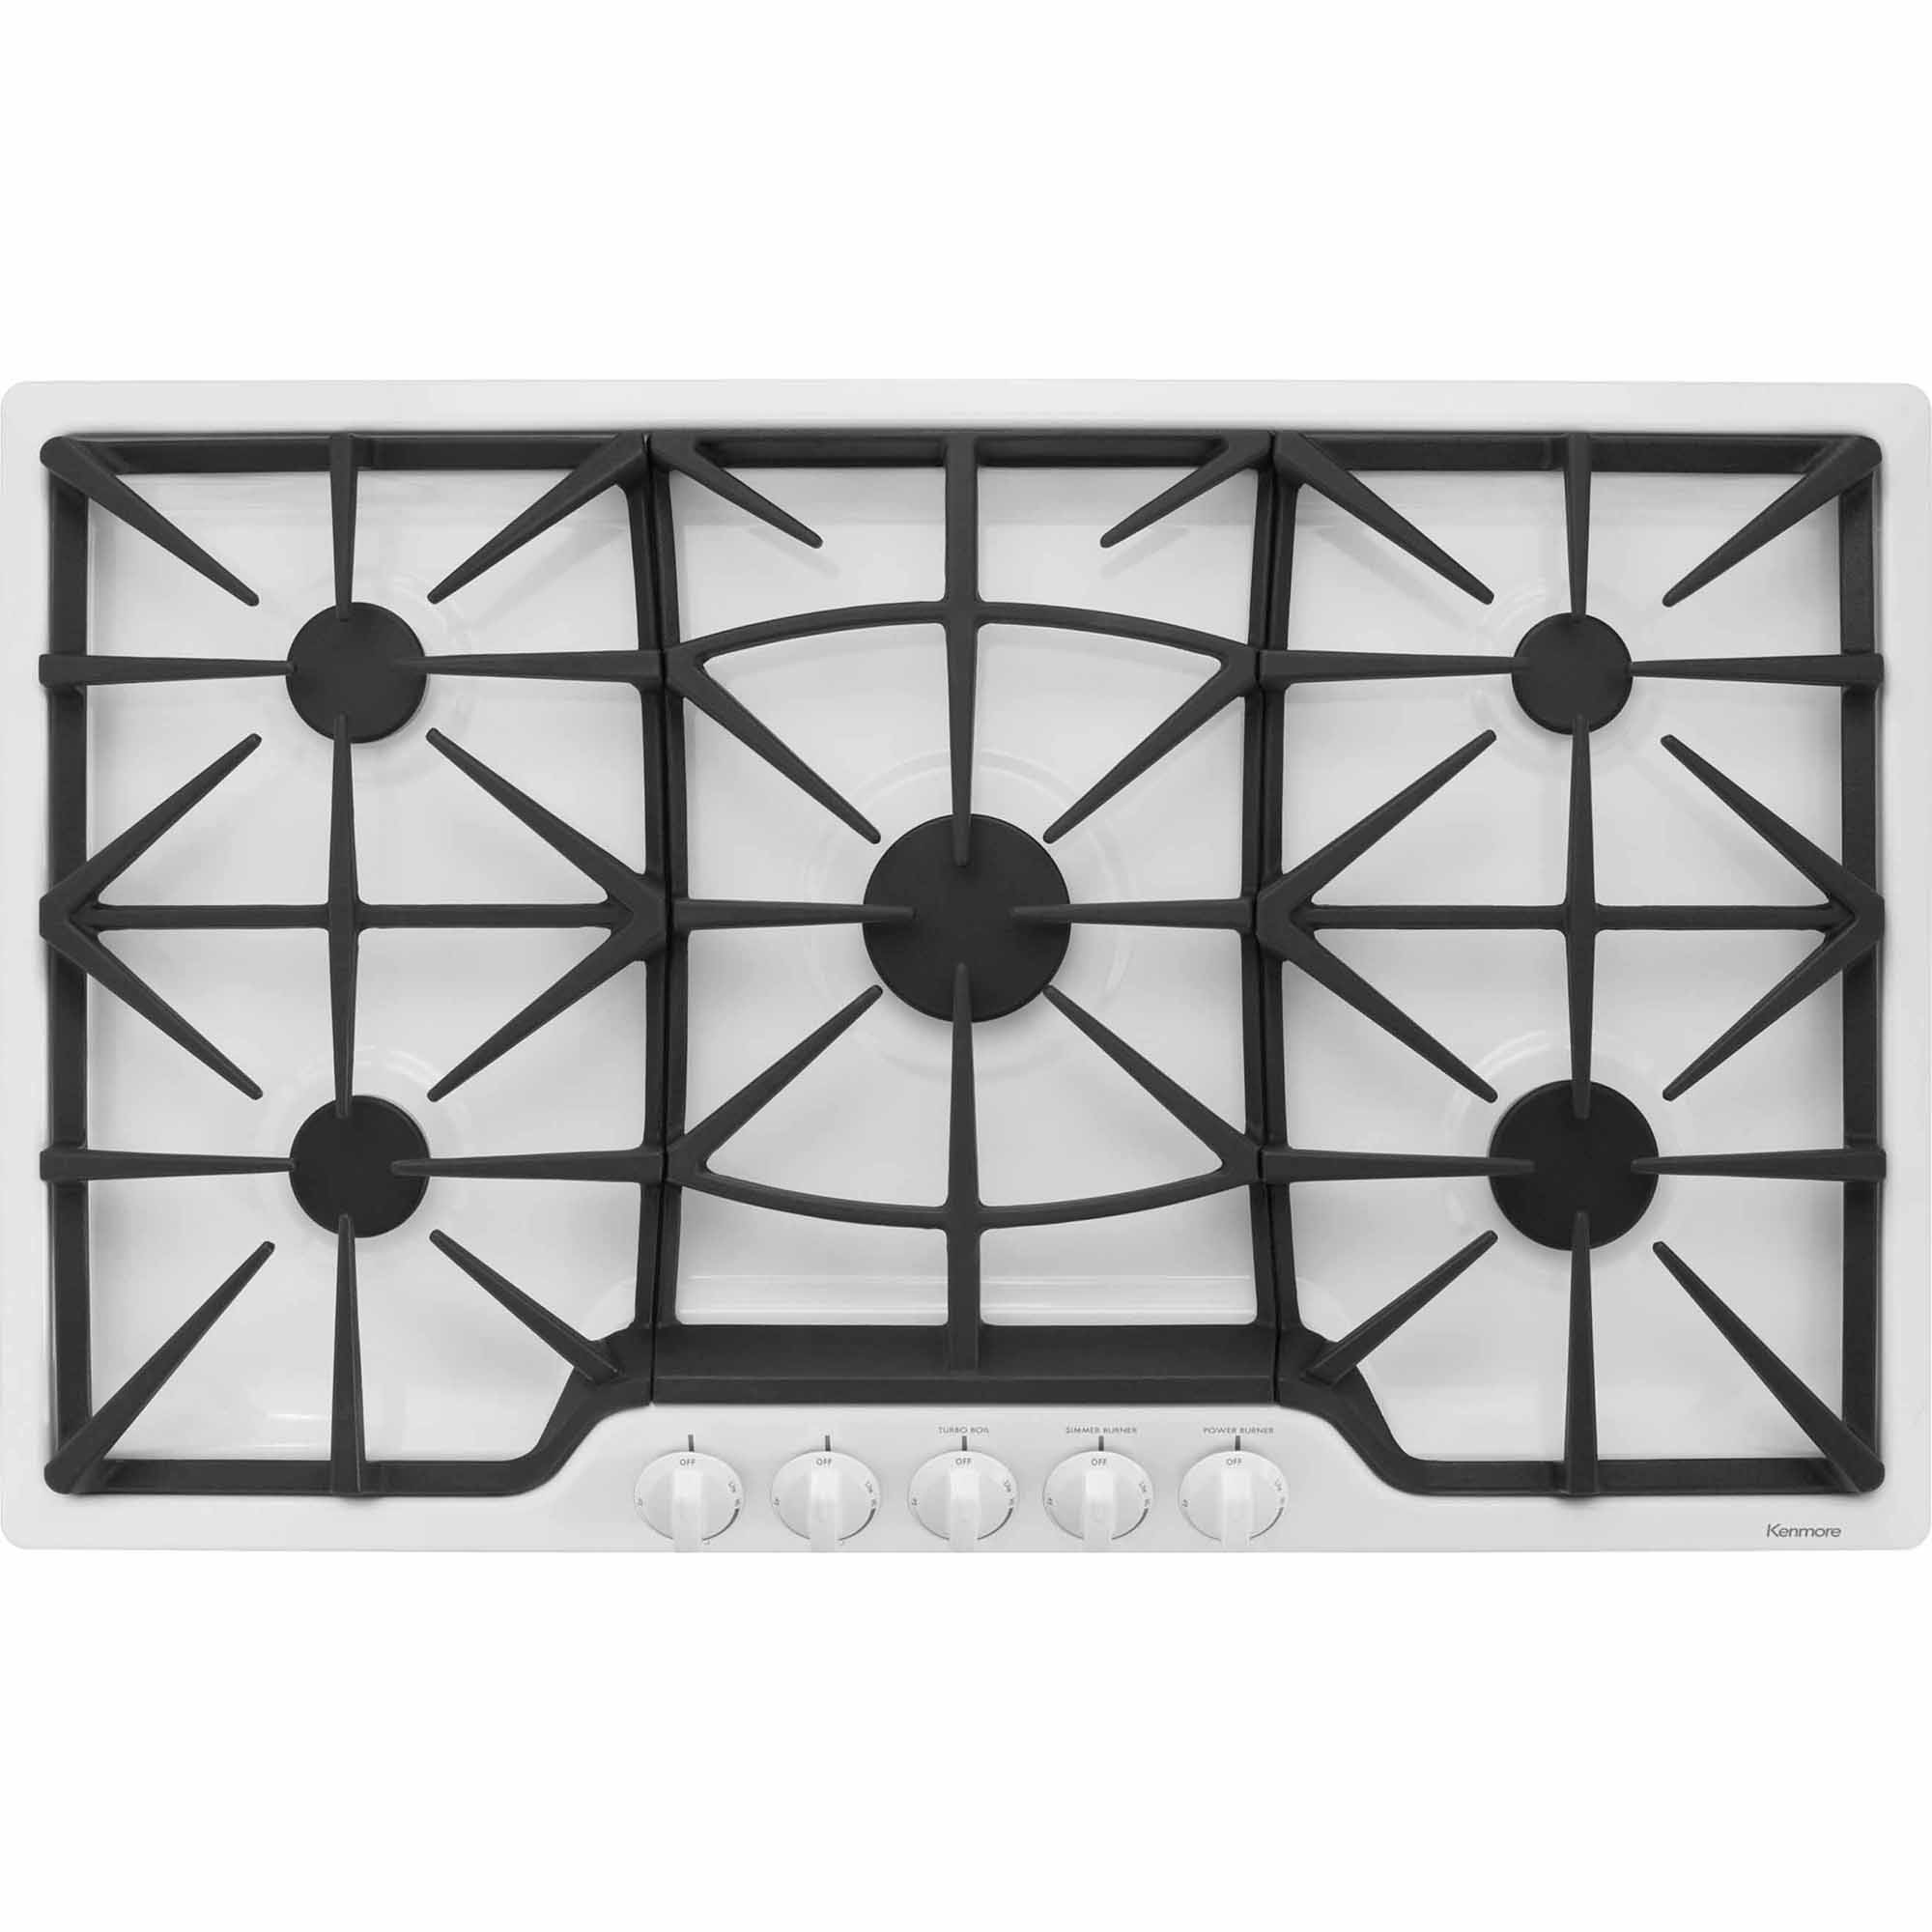 Kenmore 32692 36 Gas Cooktop - White